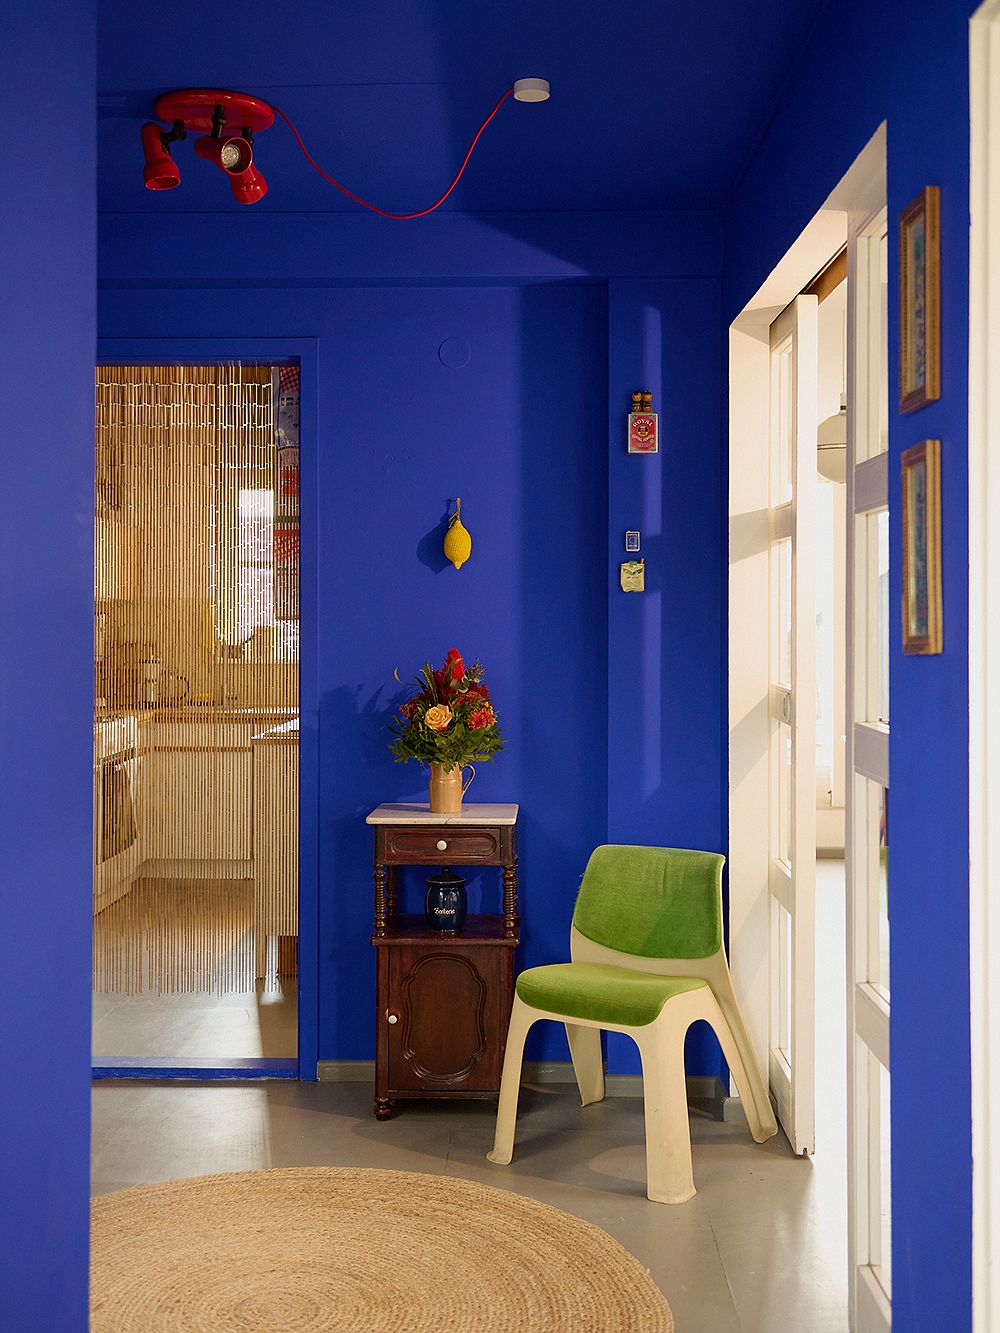 Hallway with blue walls and ceiling